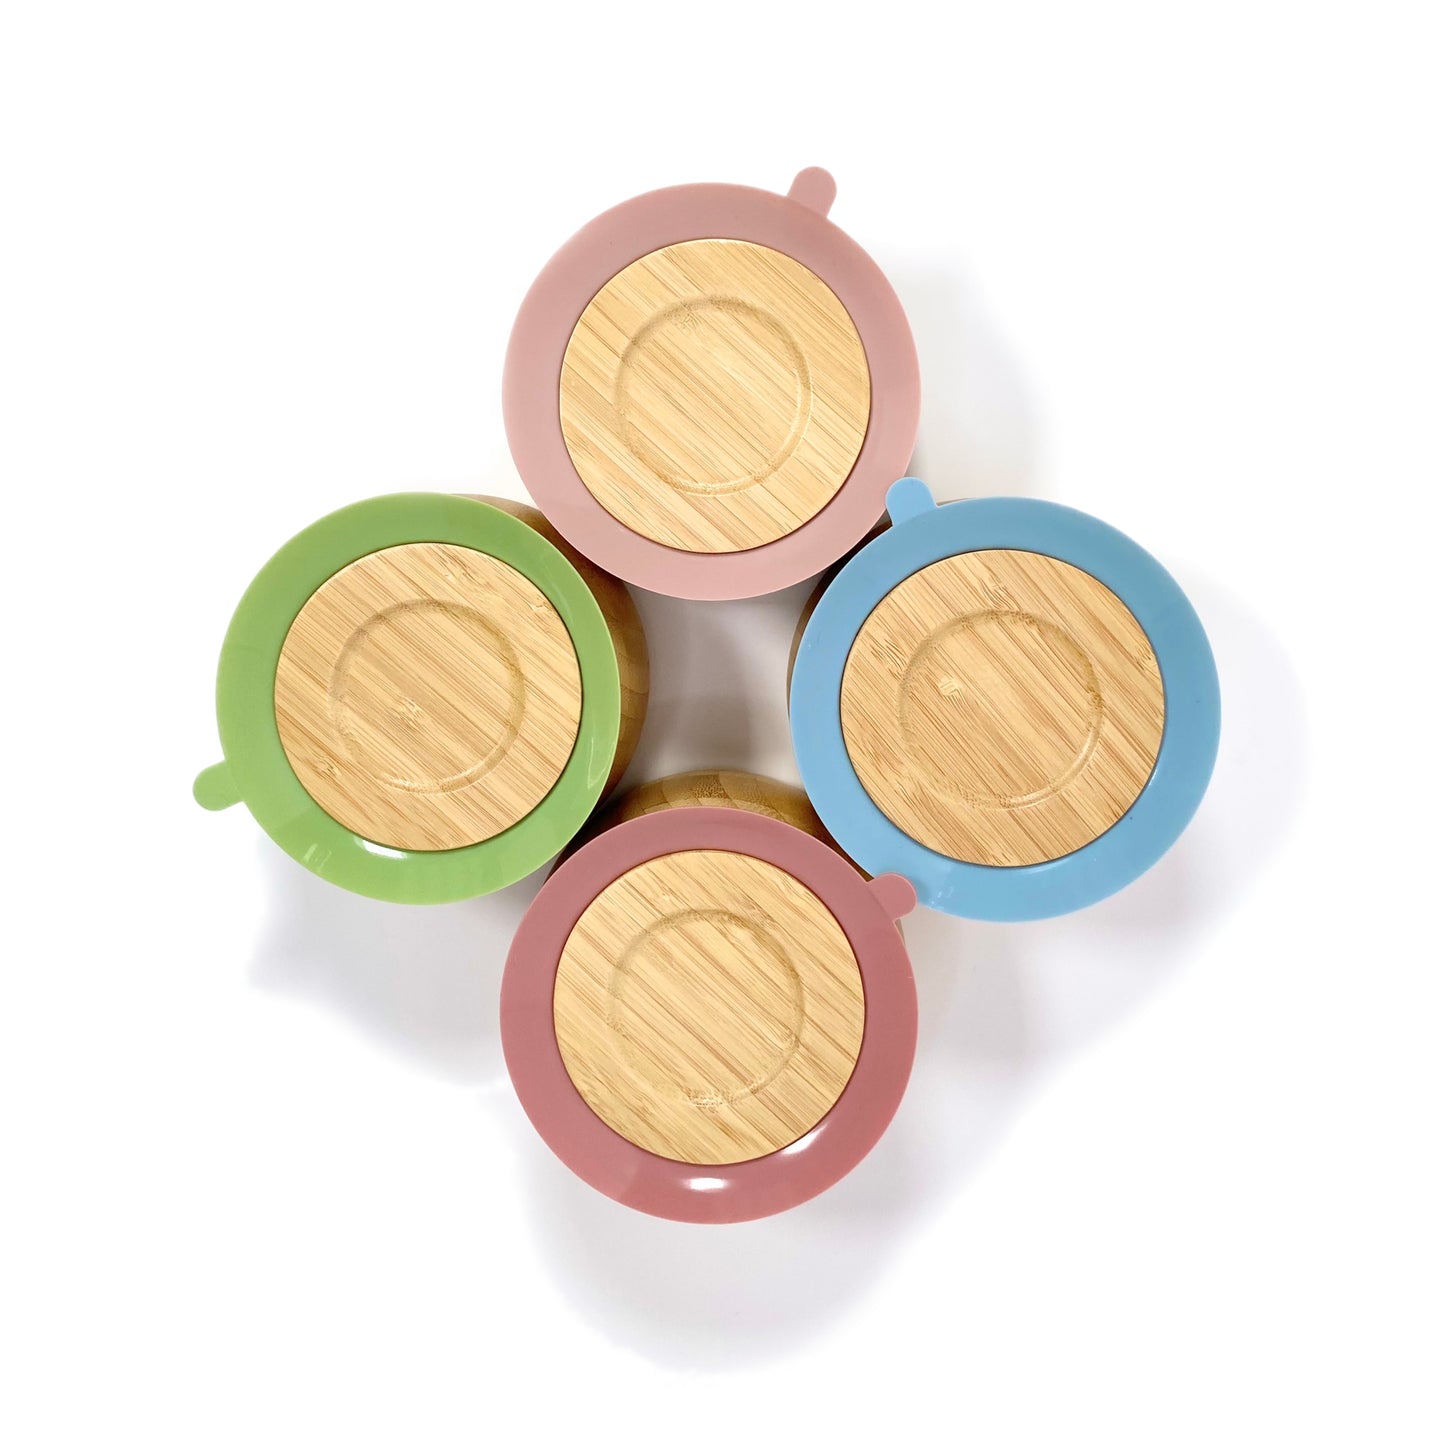 Four children’s bamboo bowls with silicone suction rings, available in four different ring colours: blossom pink, olive green, blush pink and sky blue. Image shows the underside of the bowls, featuring the silicone suction rings.